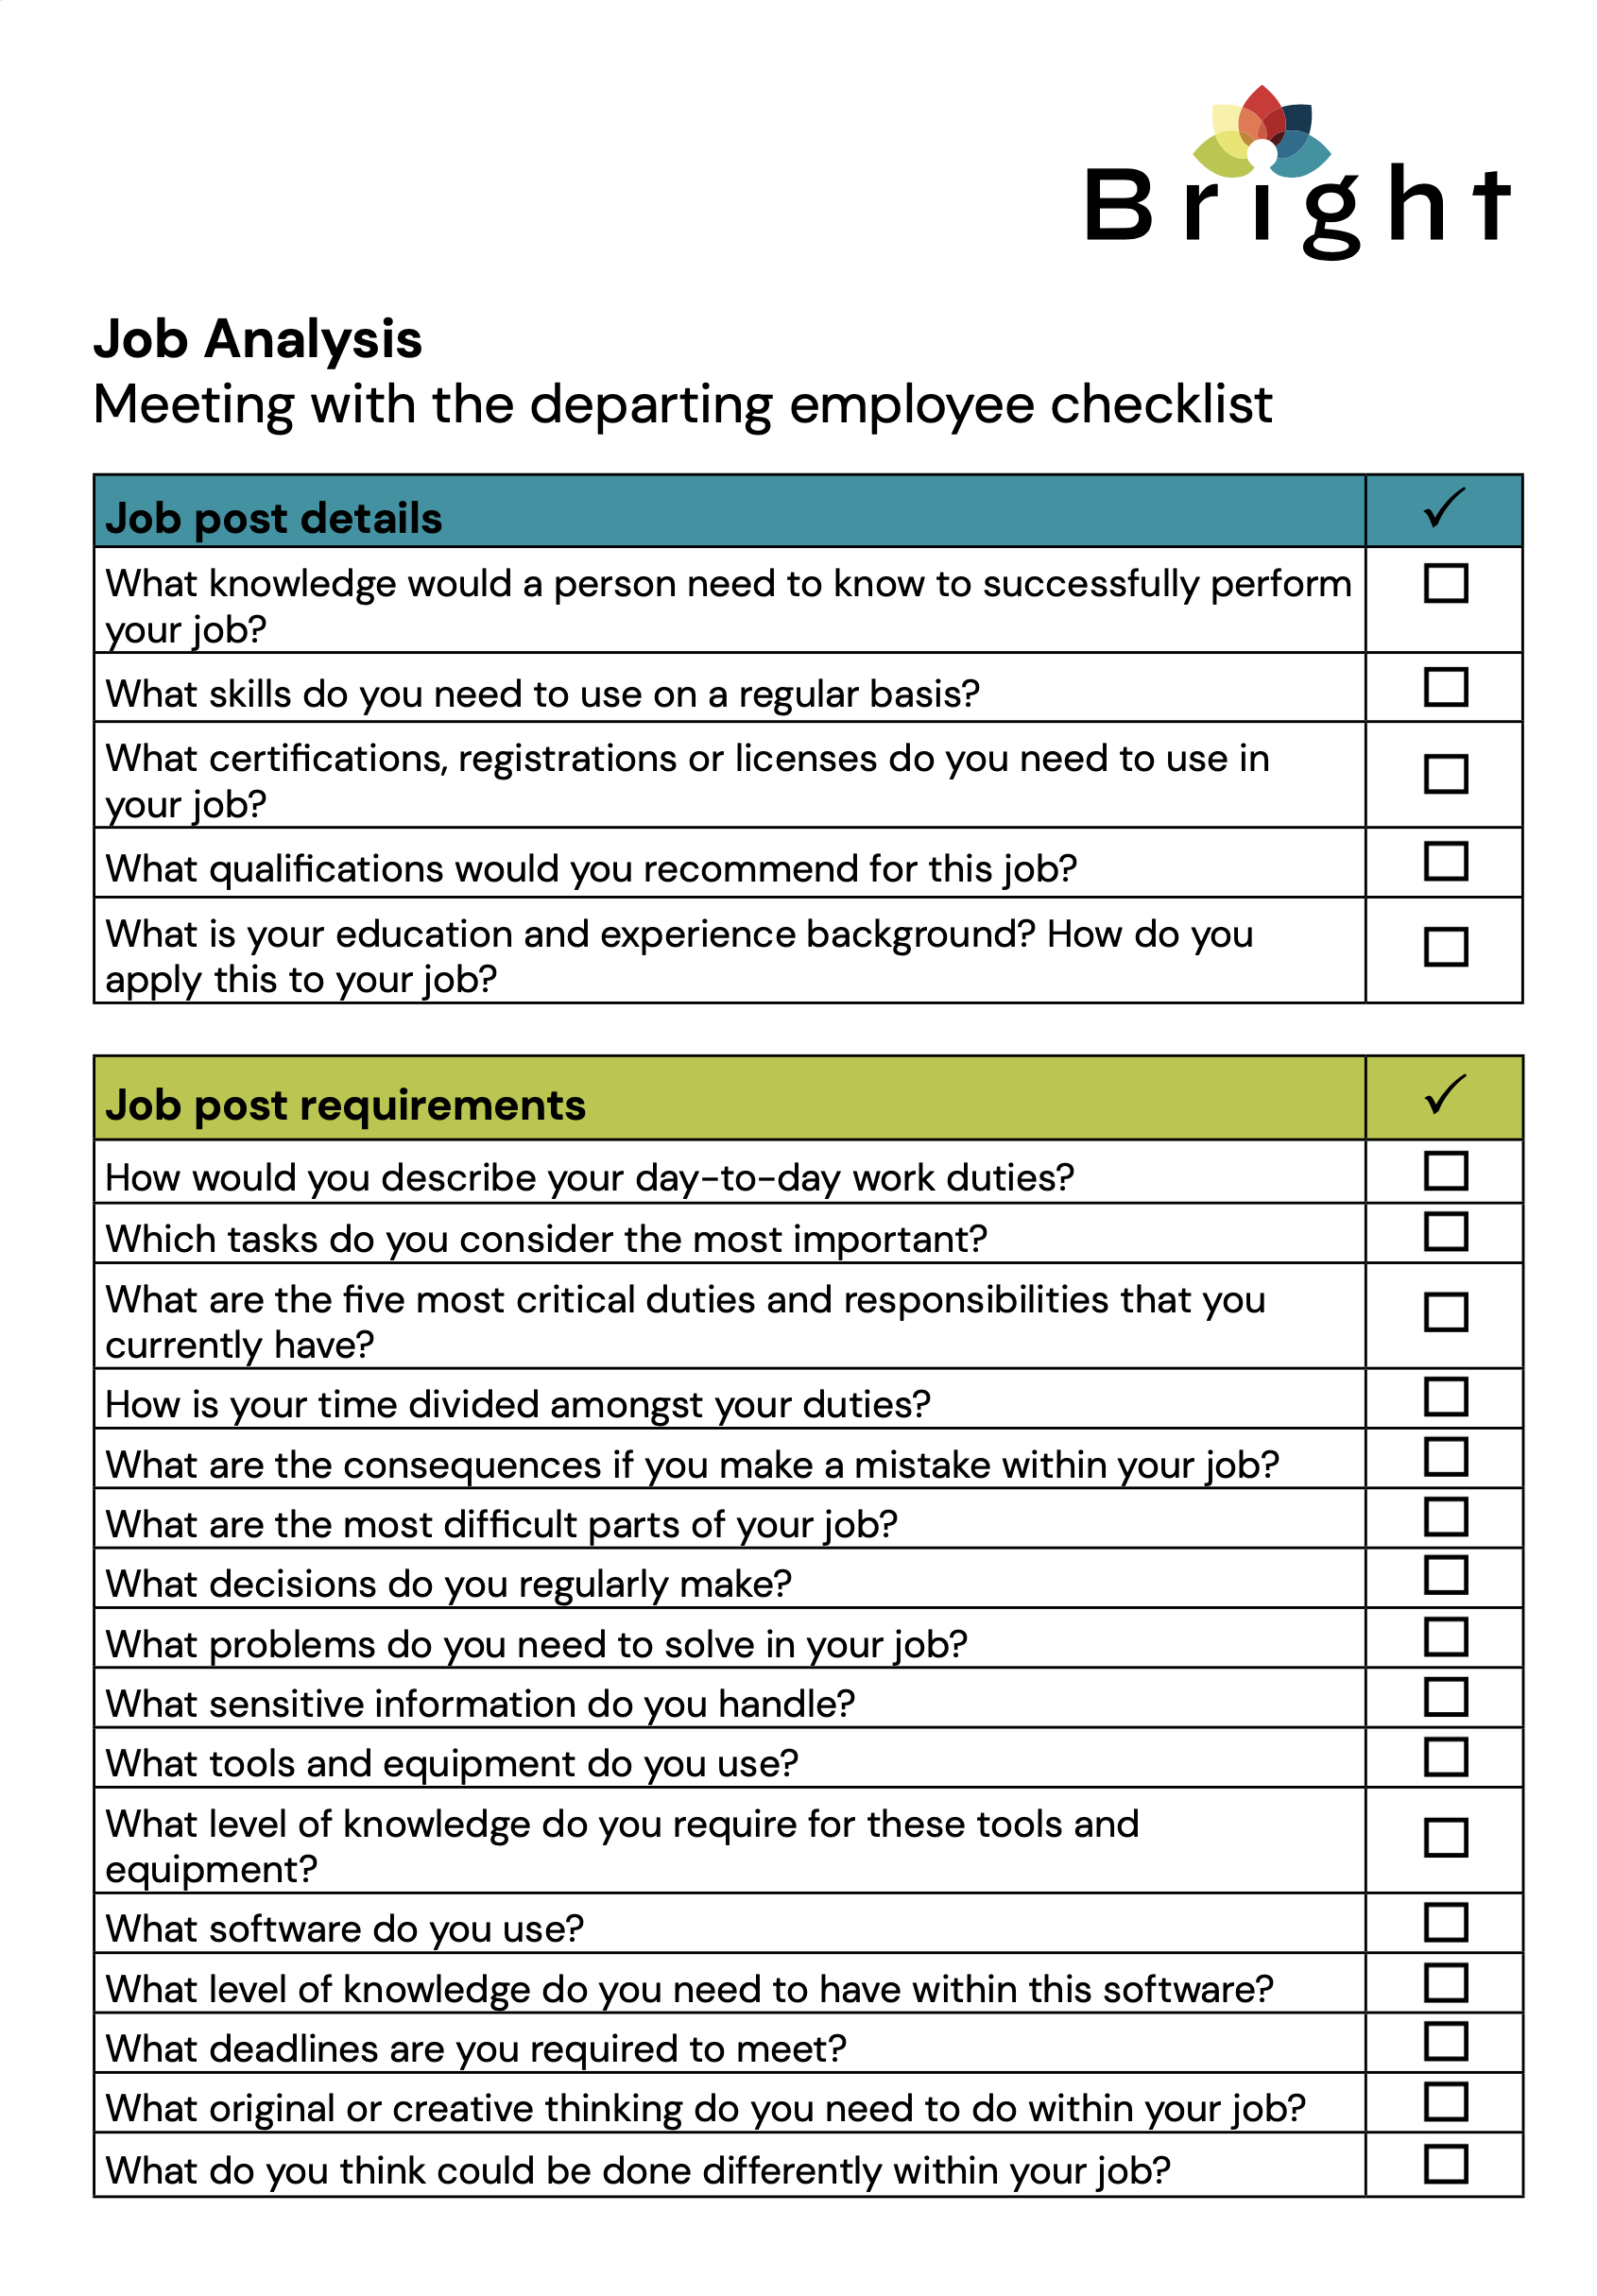 Checklist for departing employees